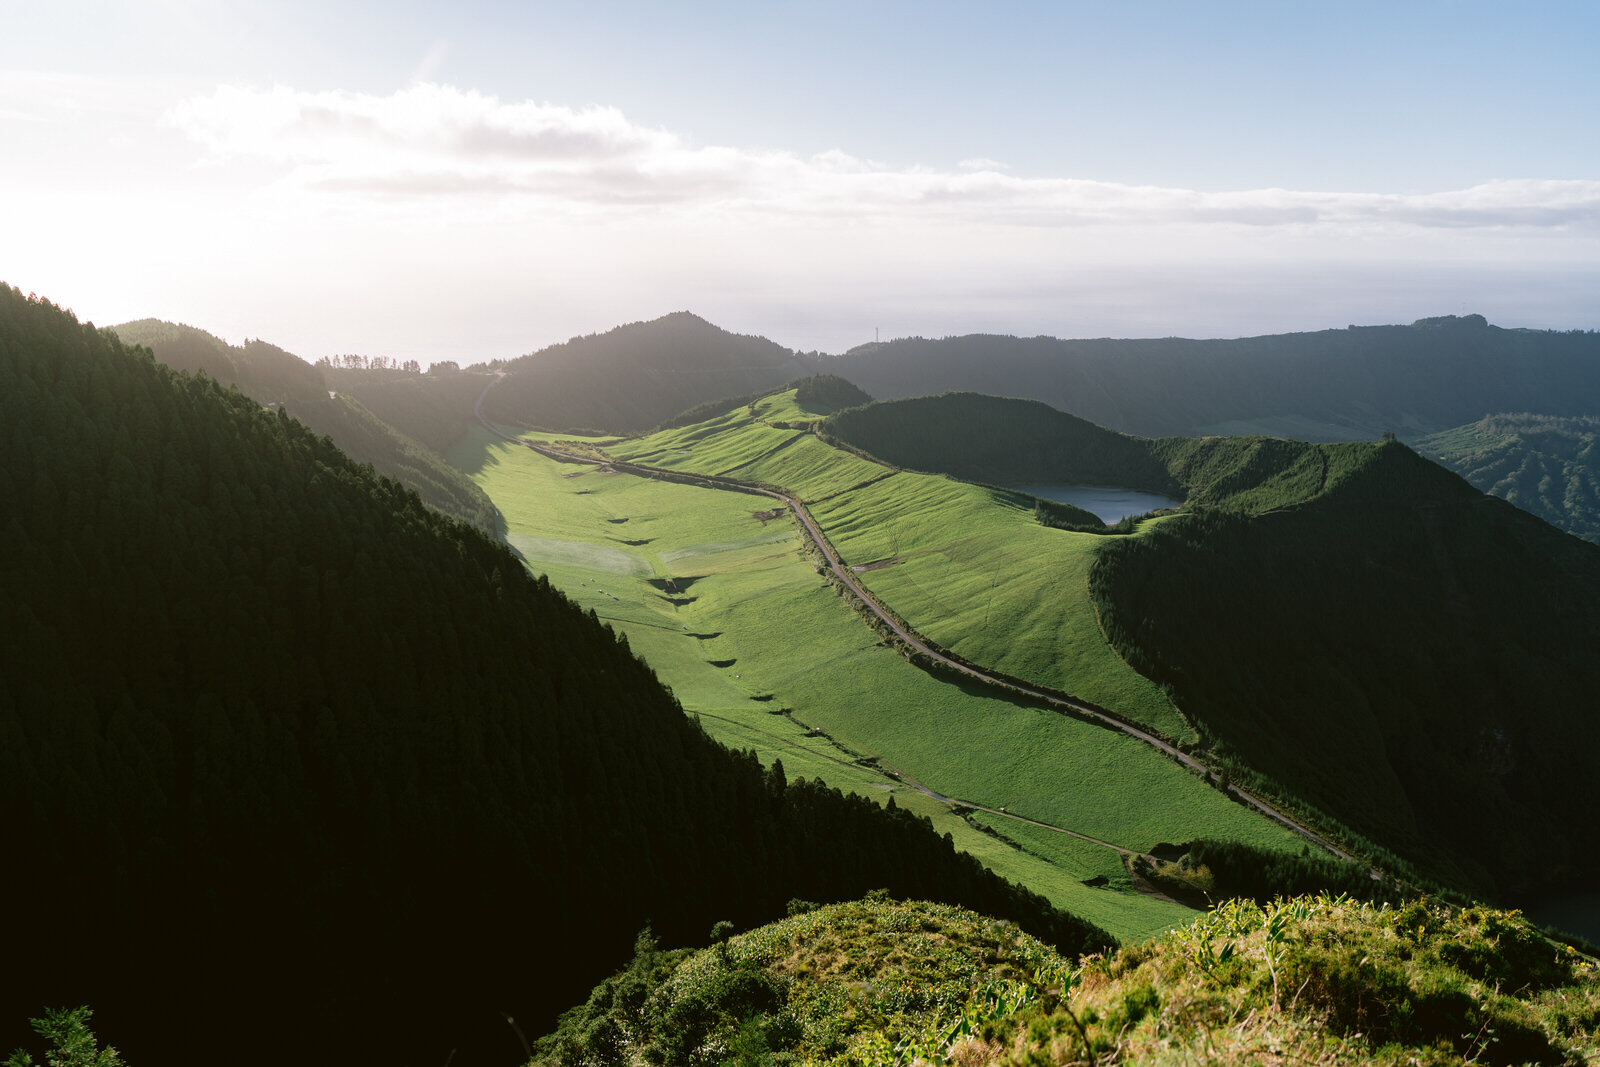 Elopement in the Azores. Cpuple getting married in Portugal. Elopement photography in Europe. Epic locations to elope in the world. Sao Miquel island Azores wedding (4).jpg